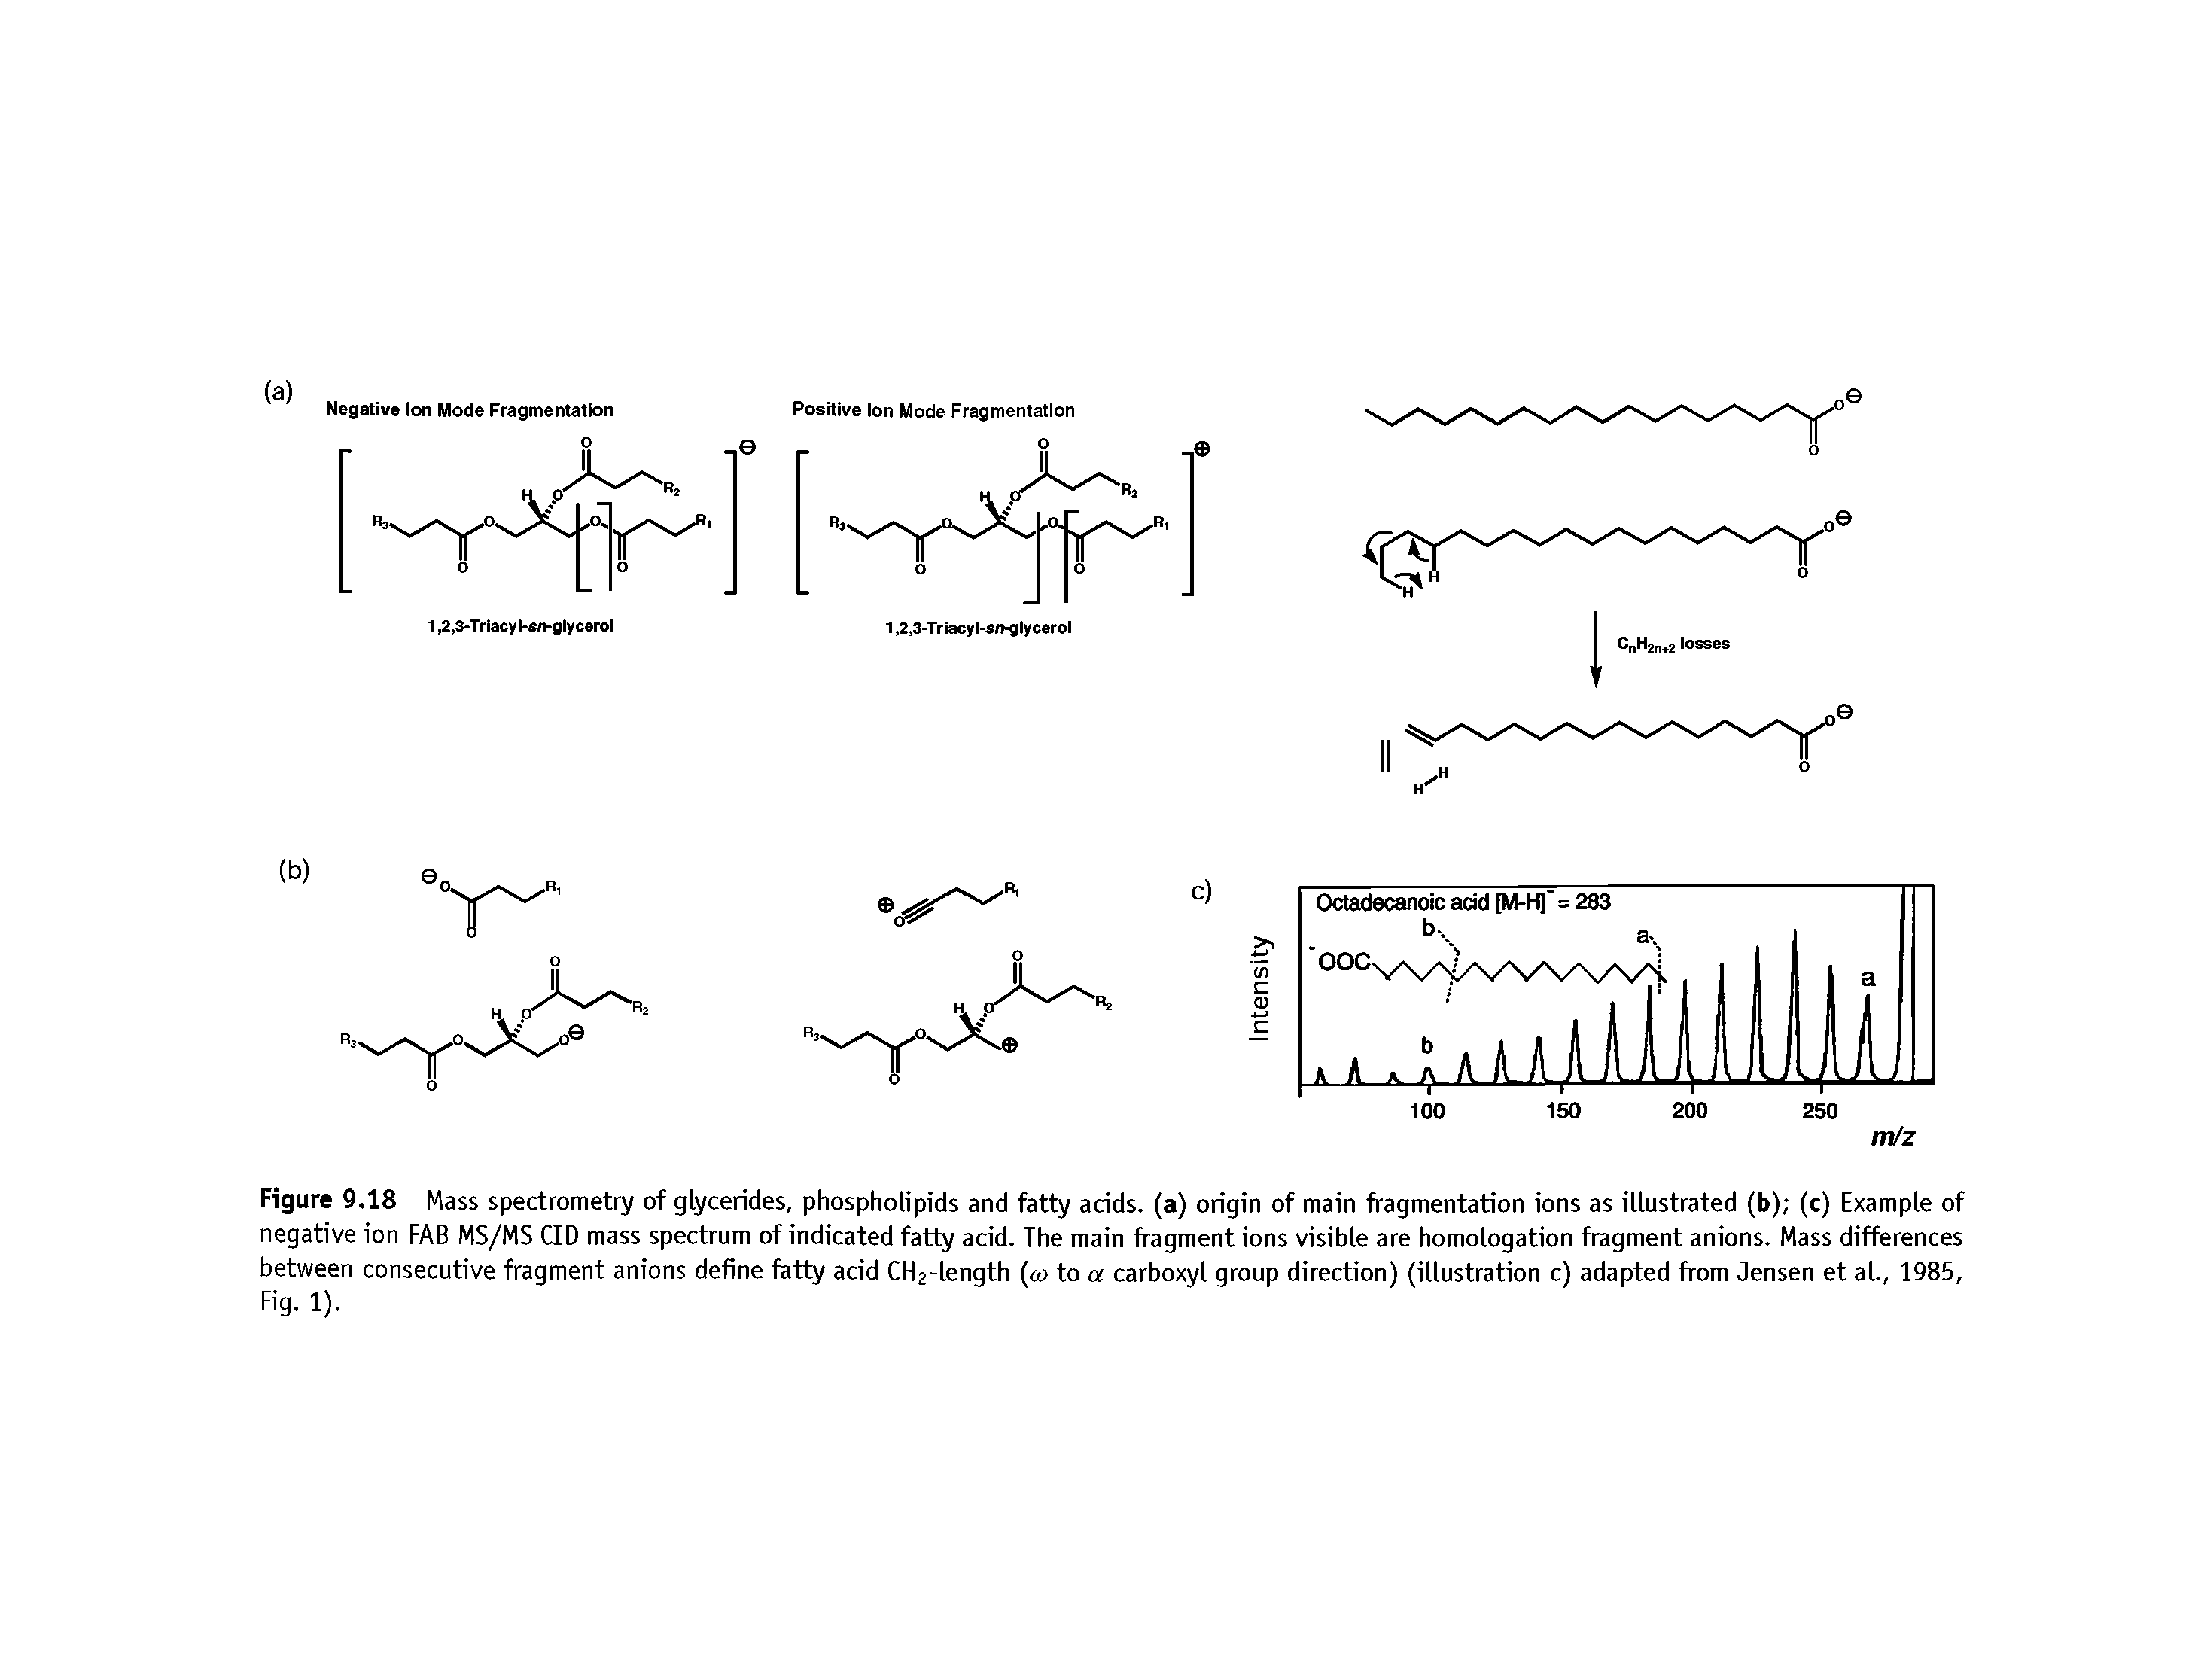 Figure 9.18 Mass spectrometry of glycerides, phospholipids and fatty adds, (a) origin of main fragmentation ions as illustrated (b) (c) Example of negative ion FAB MS/MS CID mass spectrum of indicated fatty acid. The main fragment ions visible are homologation fragment anions. Mass differences between consecutive fragment anions define fatty acid CH2-length (<w to a carboxyl group direction) (illustration c) adapted from Jensen et al., 1985, Fig. 1).